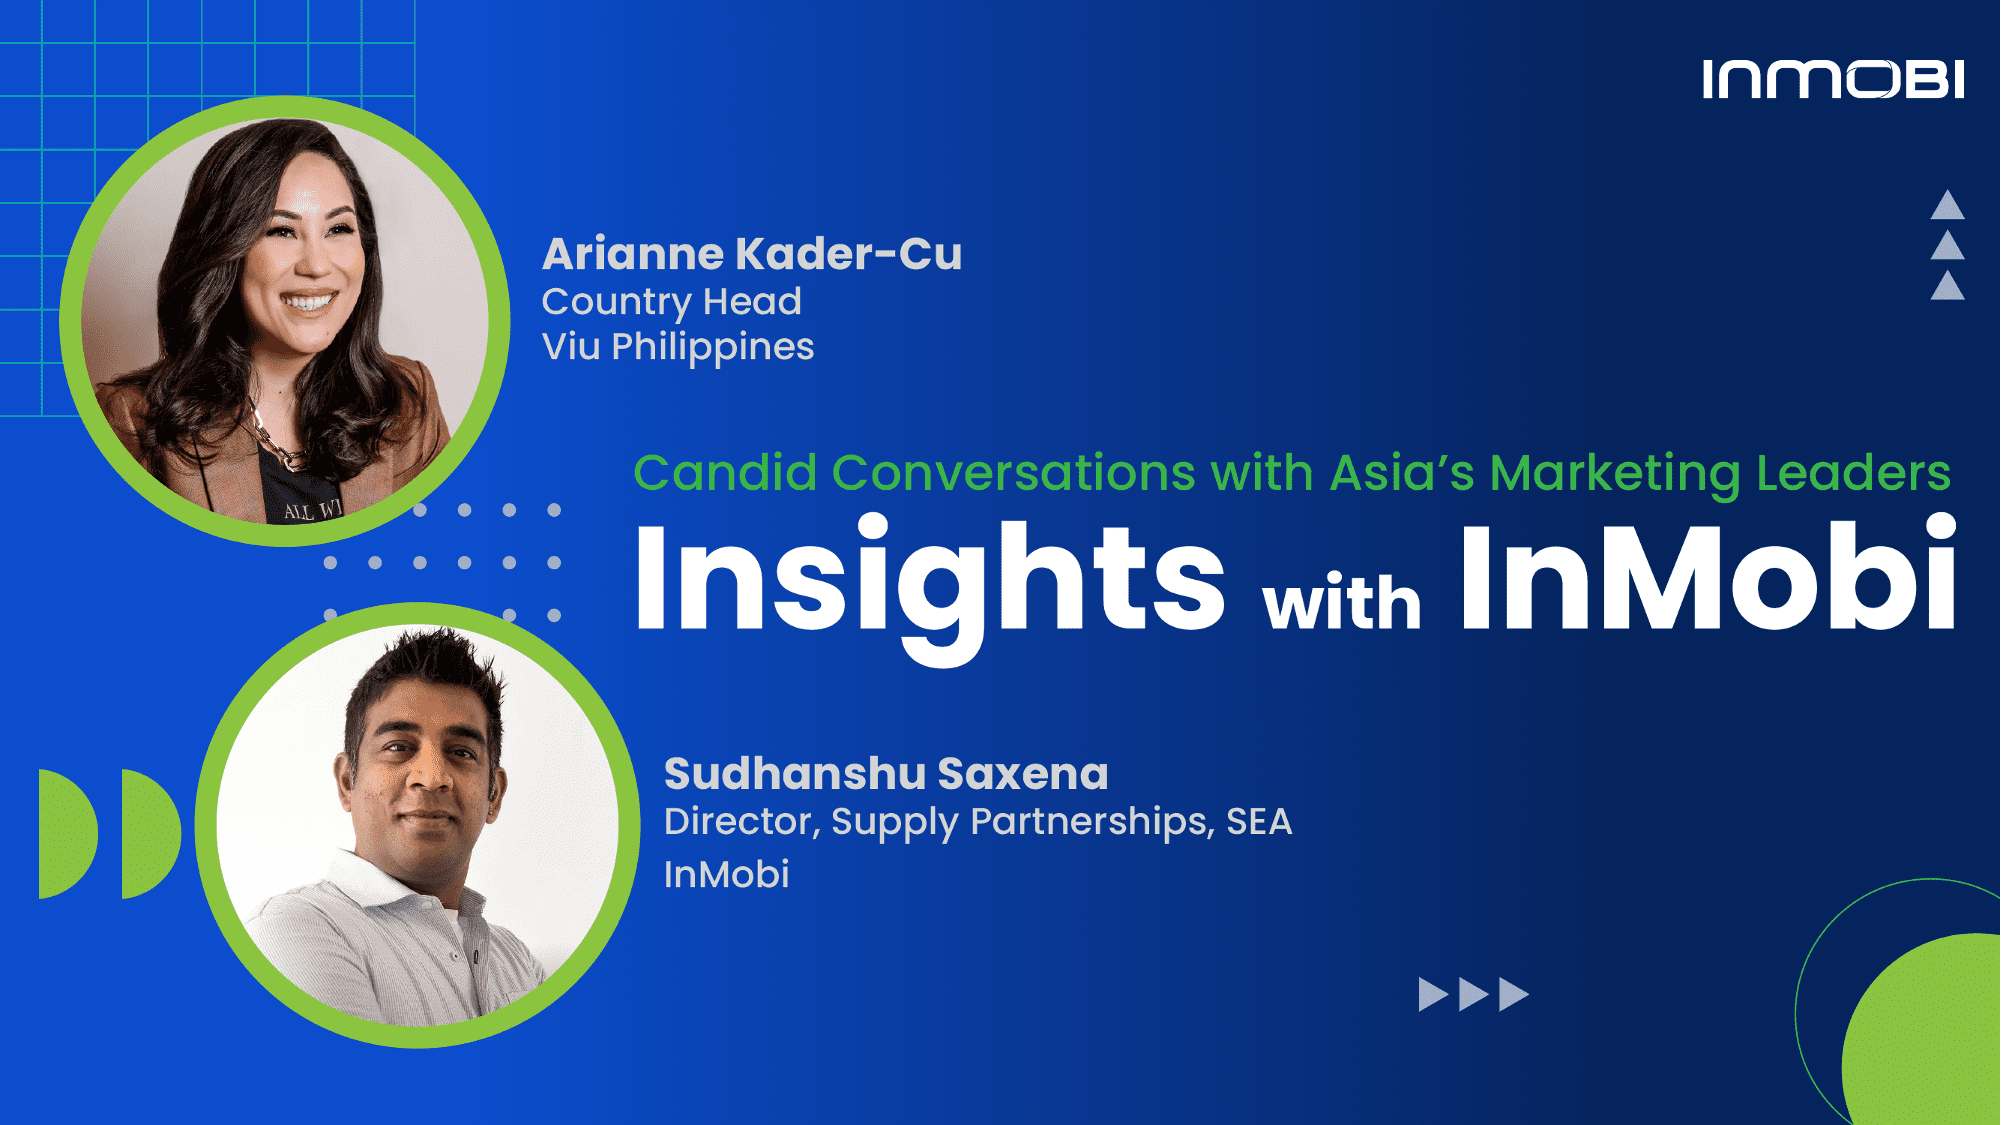 Insights with InMobi: A Candid Conversation with Arianne Kader-Cu, Viu Philippines